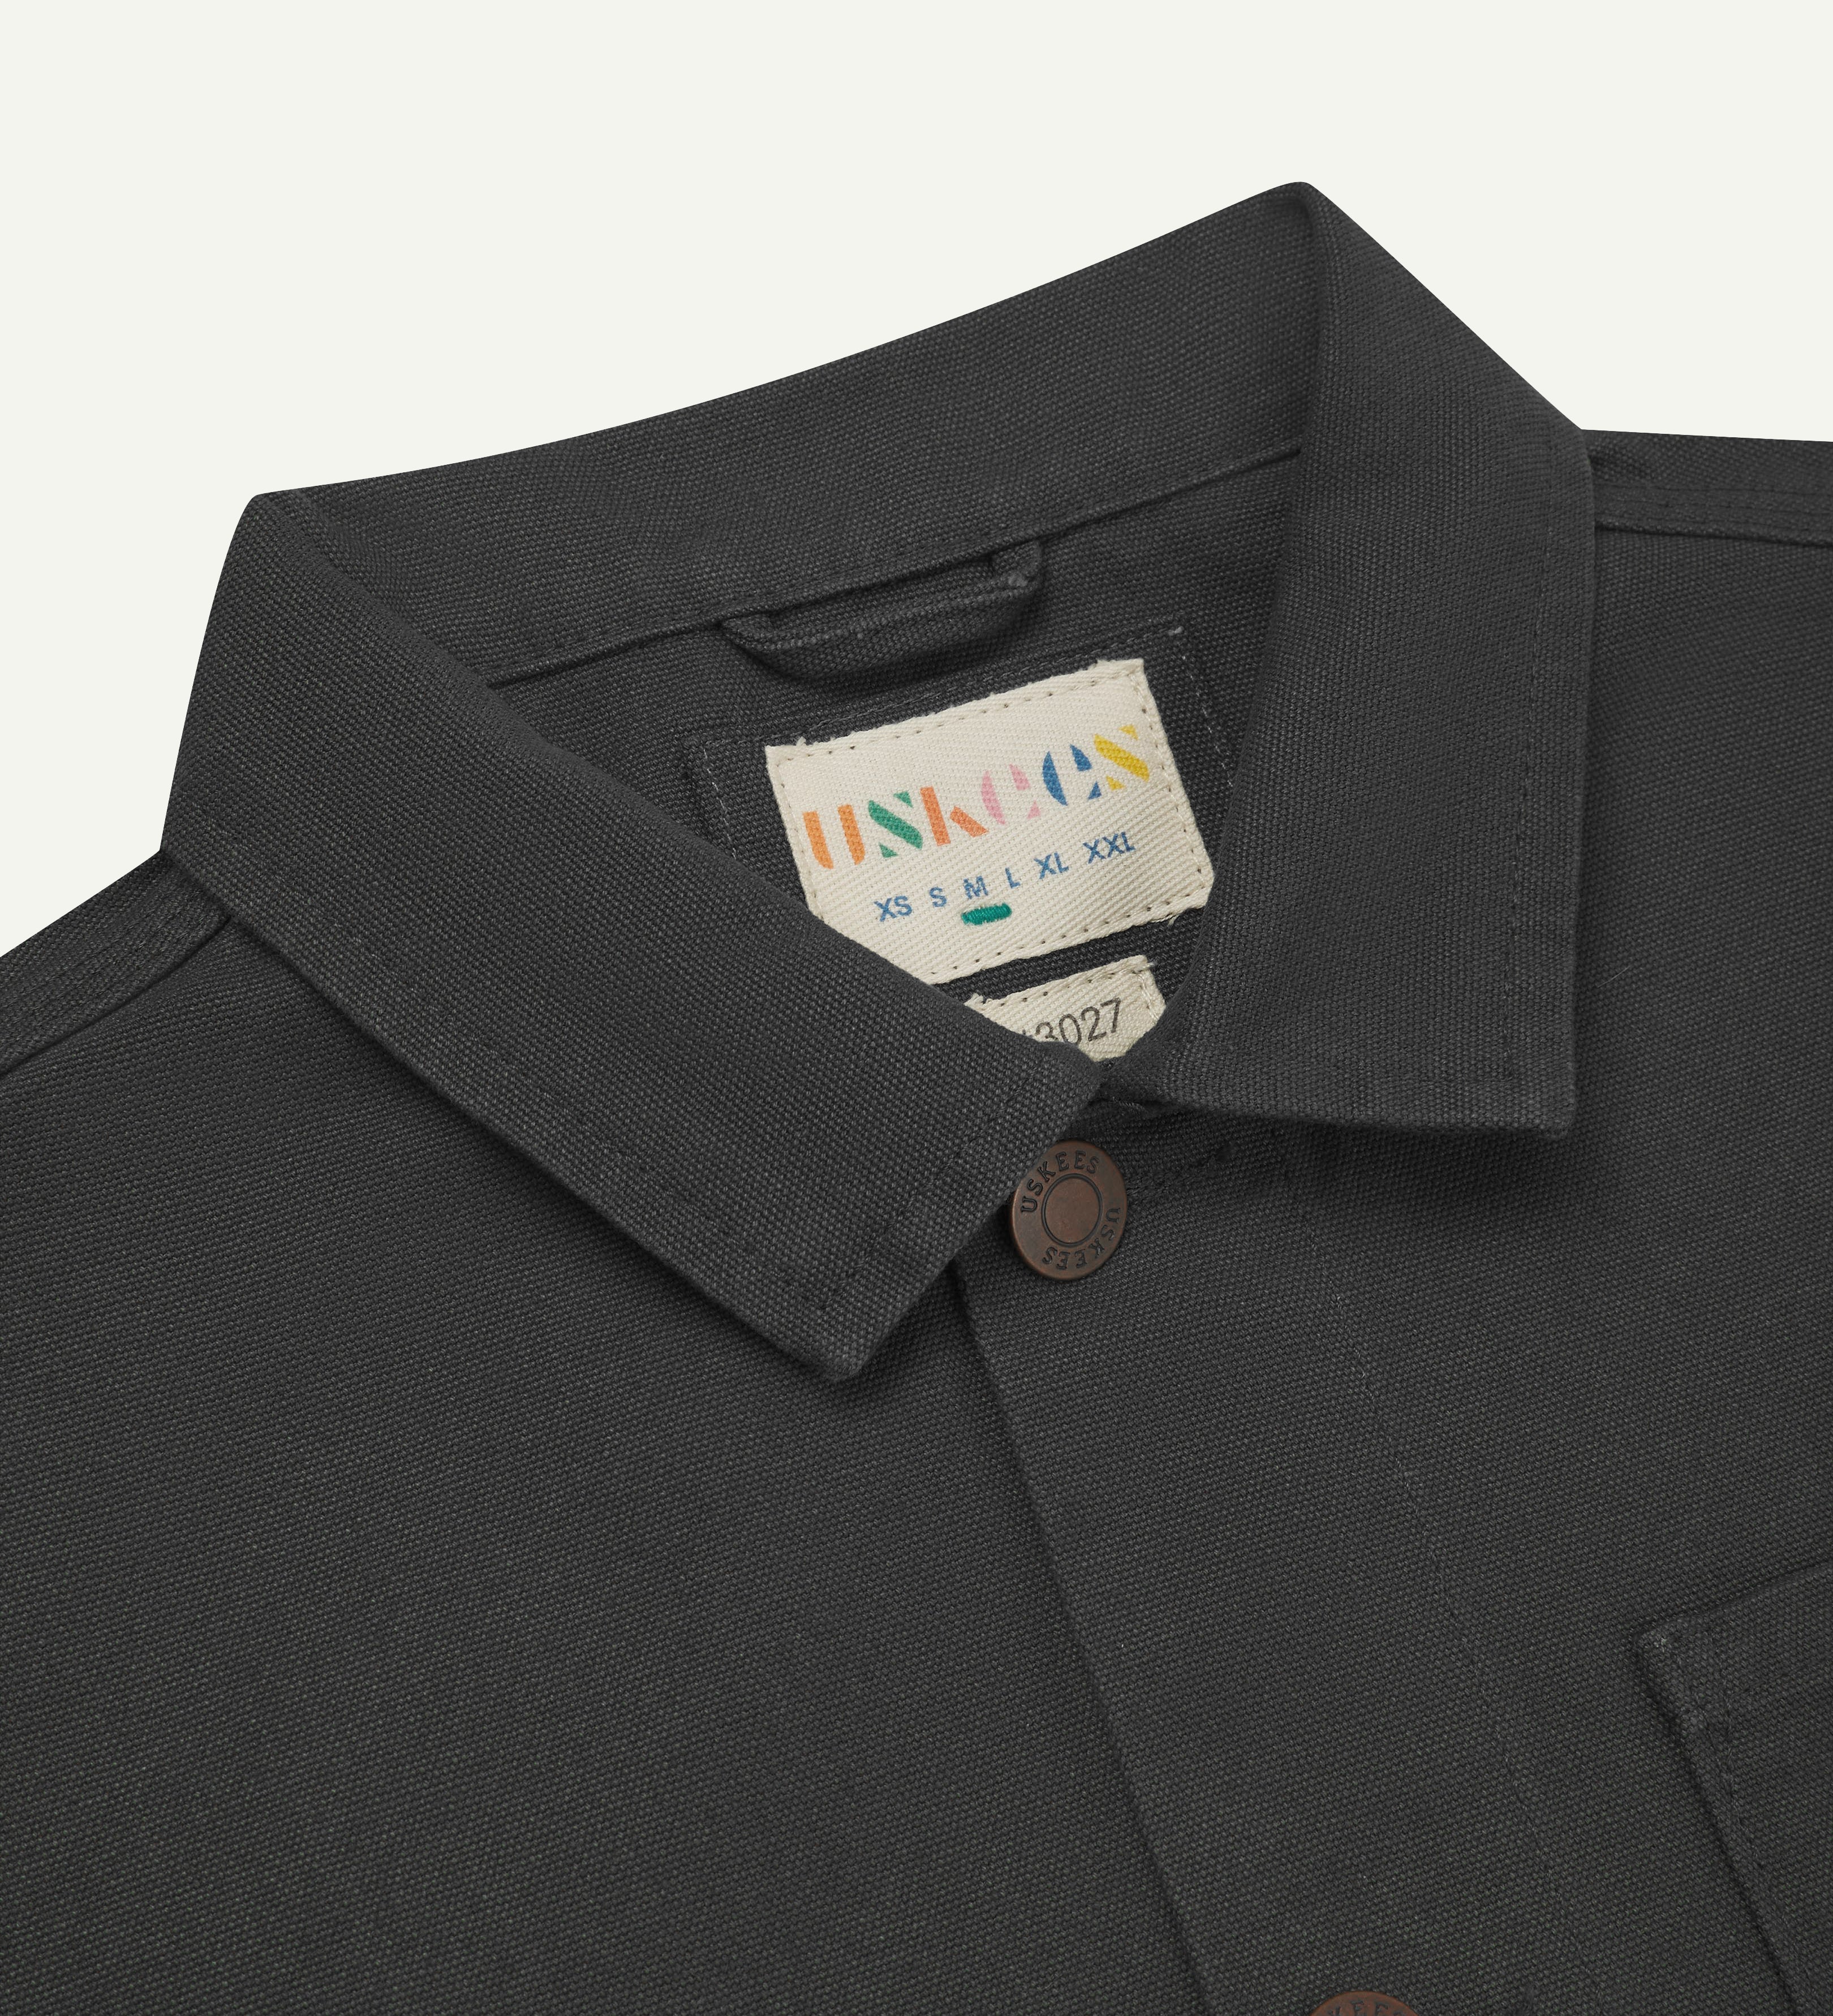 Front close-up view of uskees dark grey canvas men's overshirt presented buttoned up showing the metal buttons, collar and brand label.